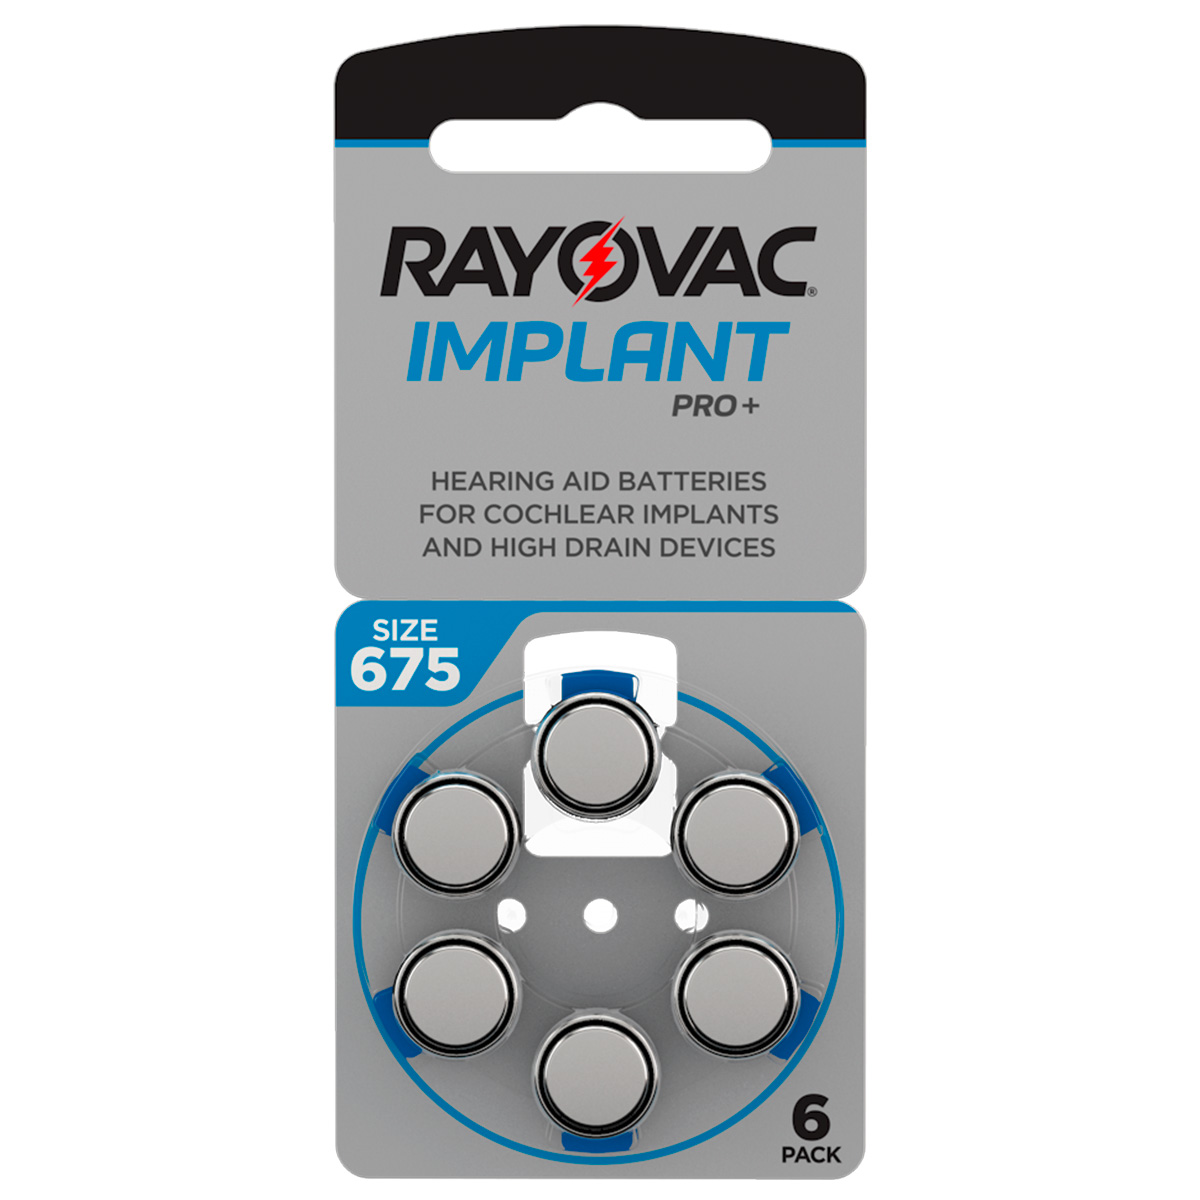 Rayovac Implant Pro+, 6 hearing aid batteries No. 675 for cochlear implants,blister